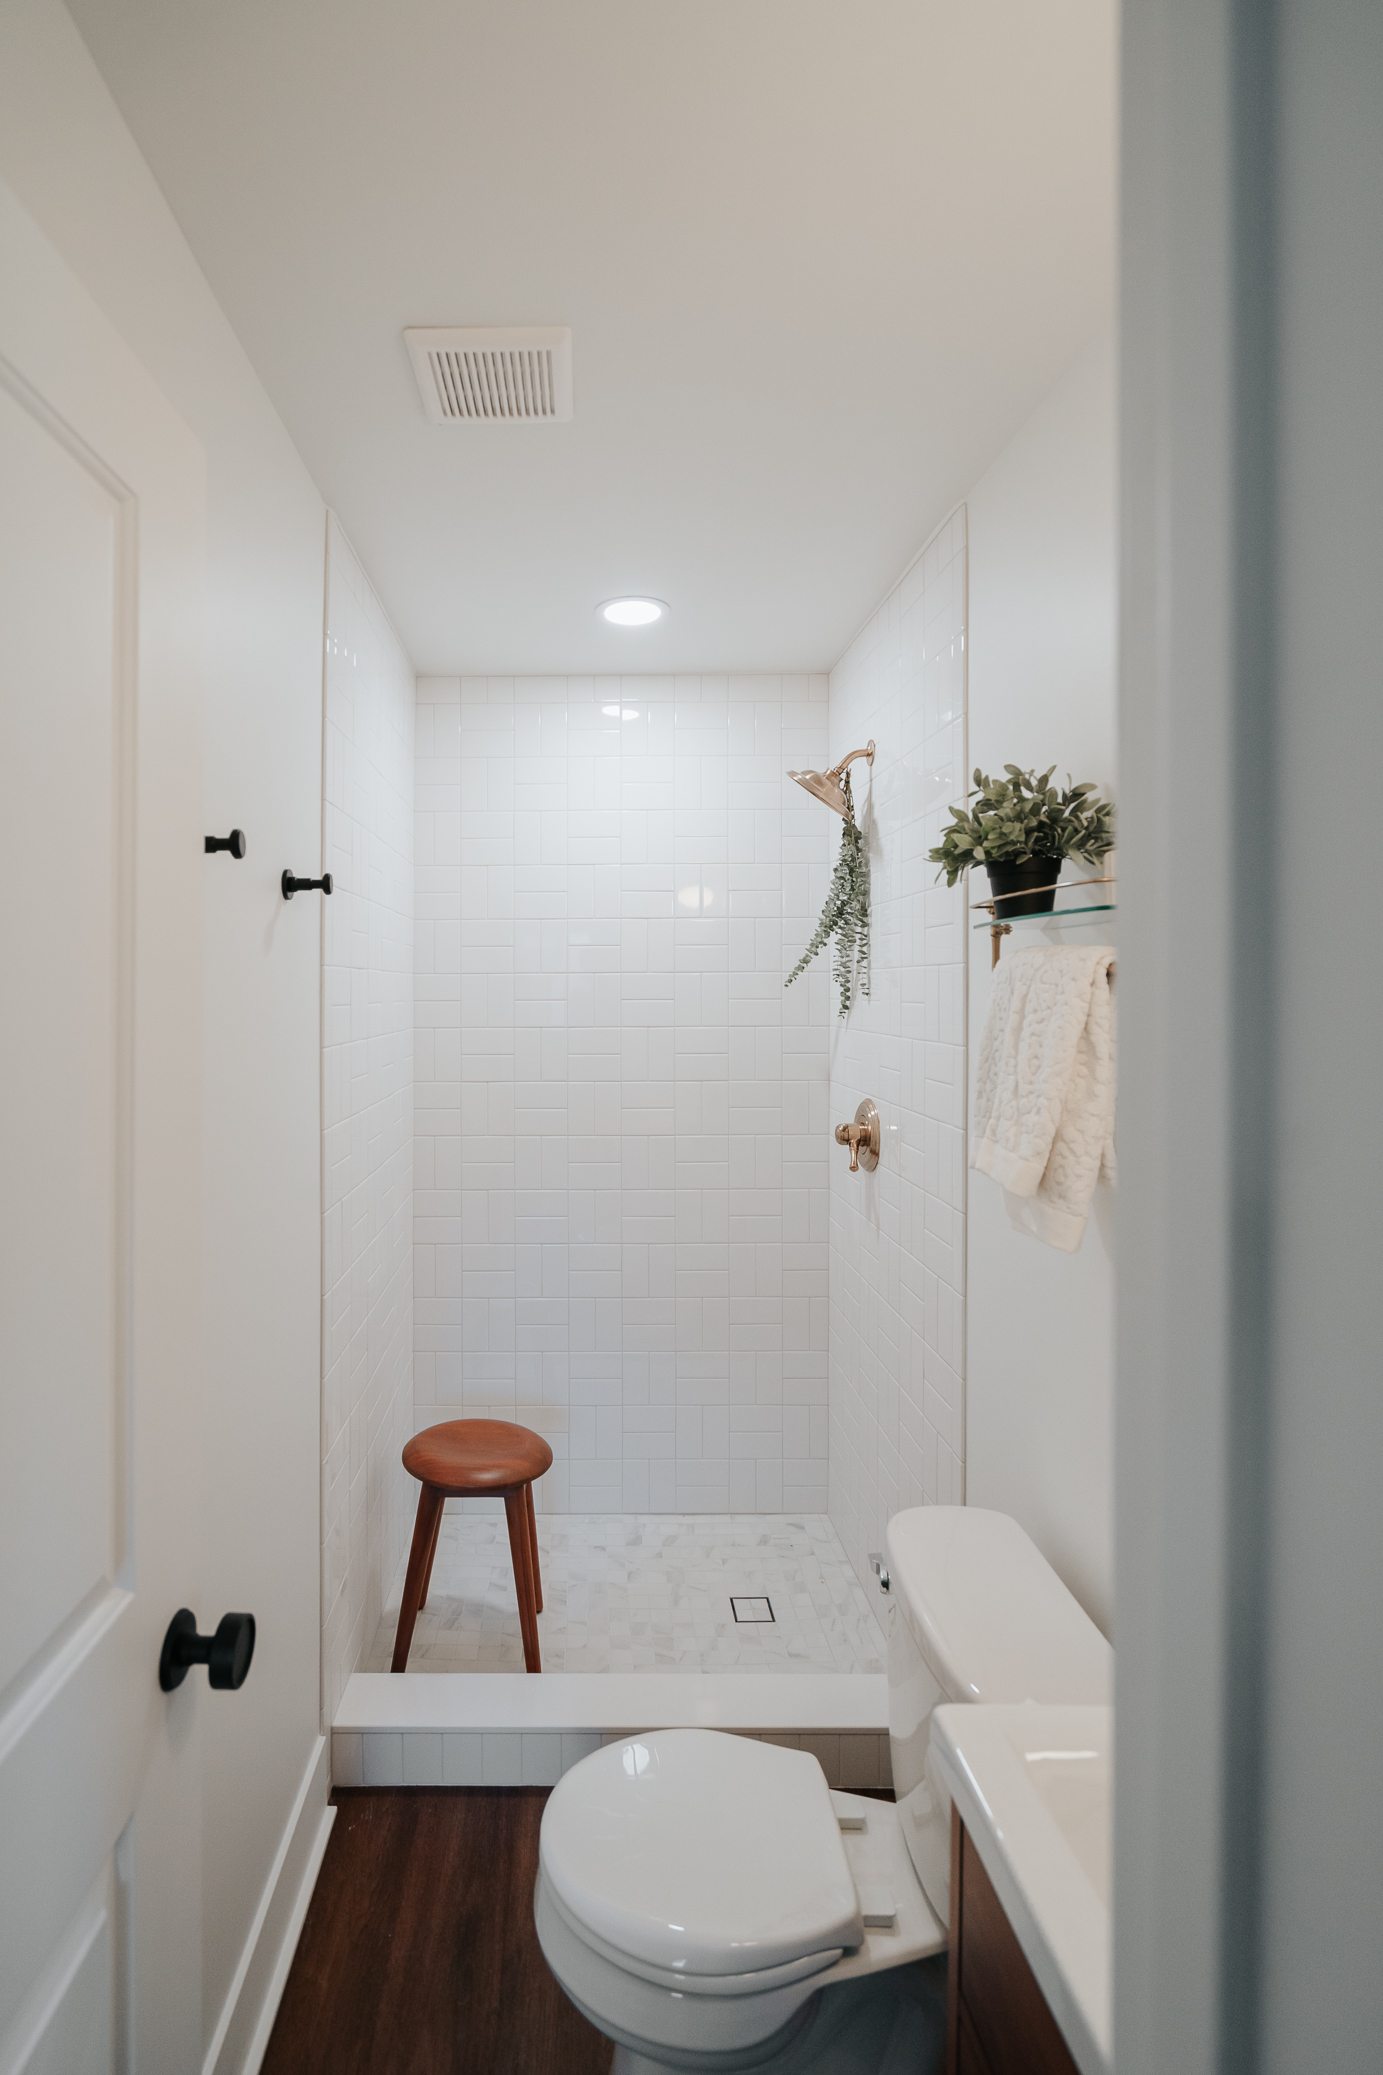 8 TIPS FOR THE PERFECT BATHROOM DECOR image 2